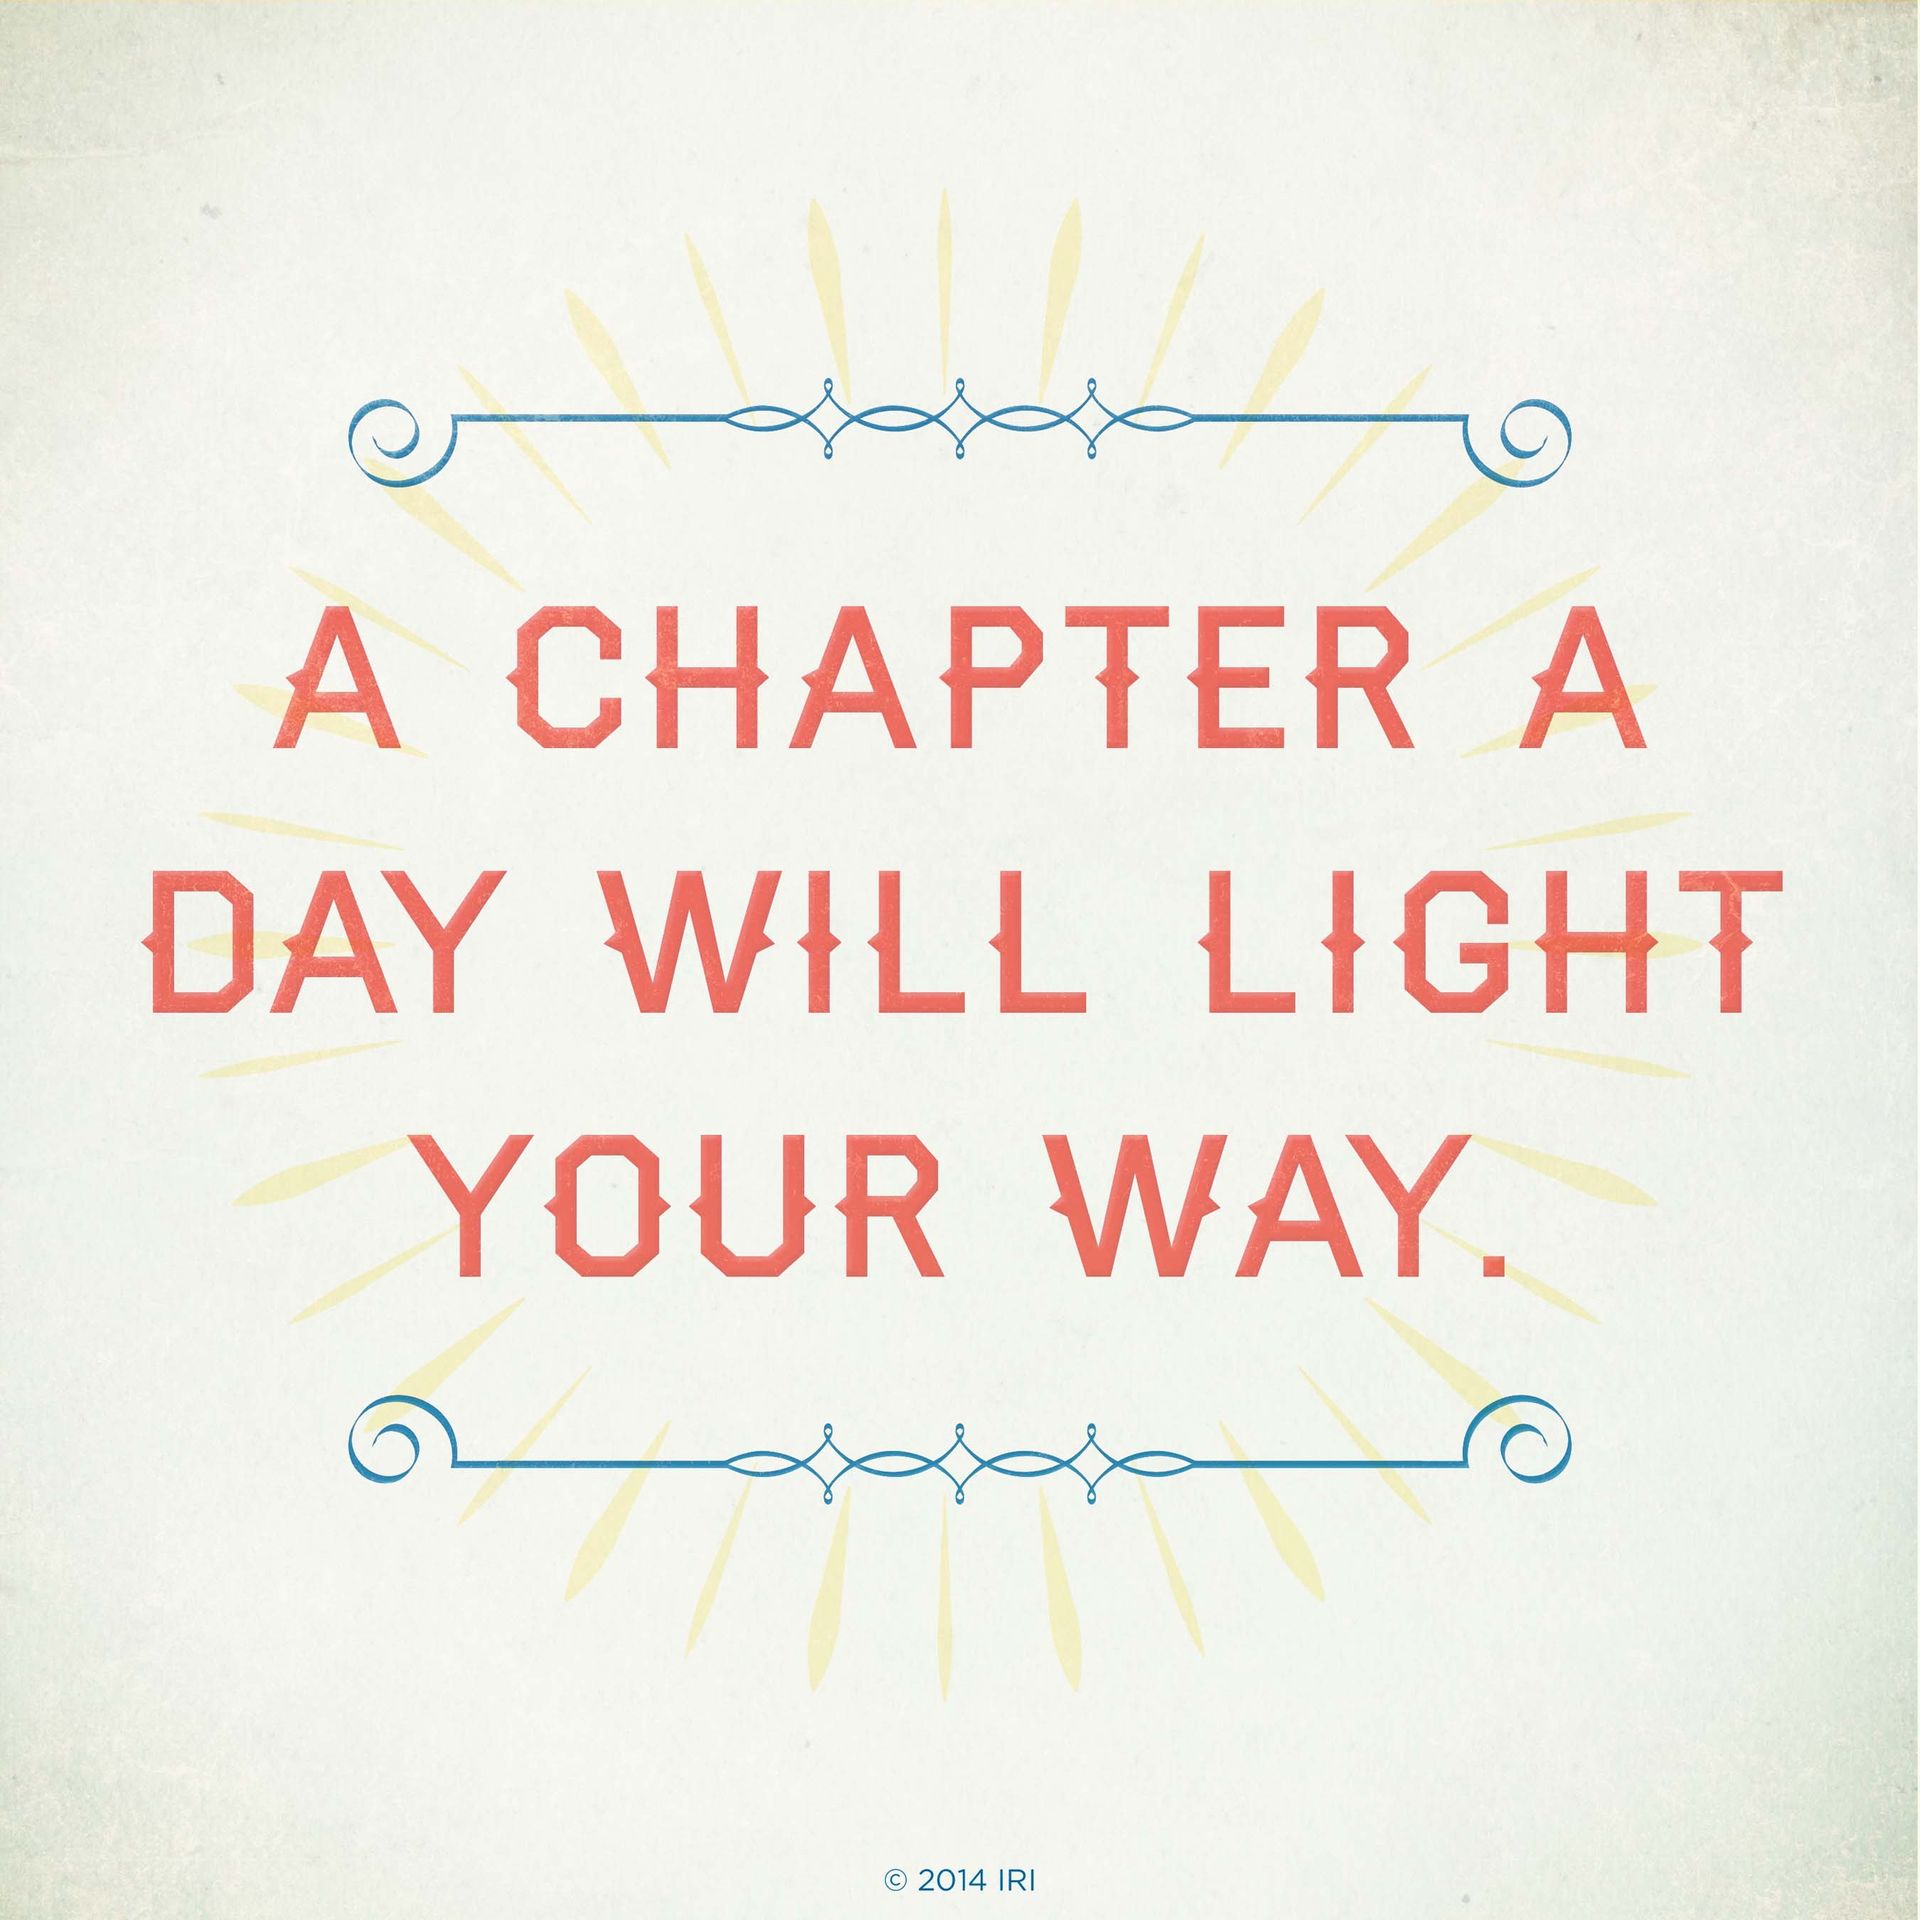 A chapter a day will light your way.